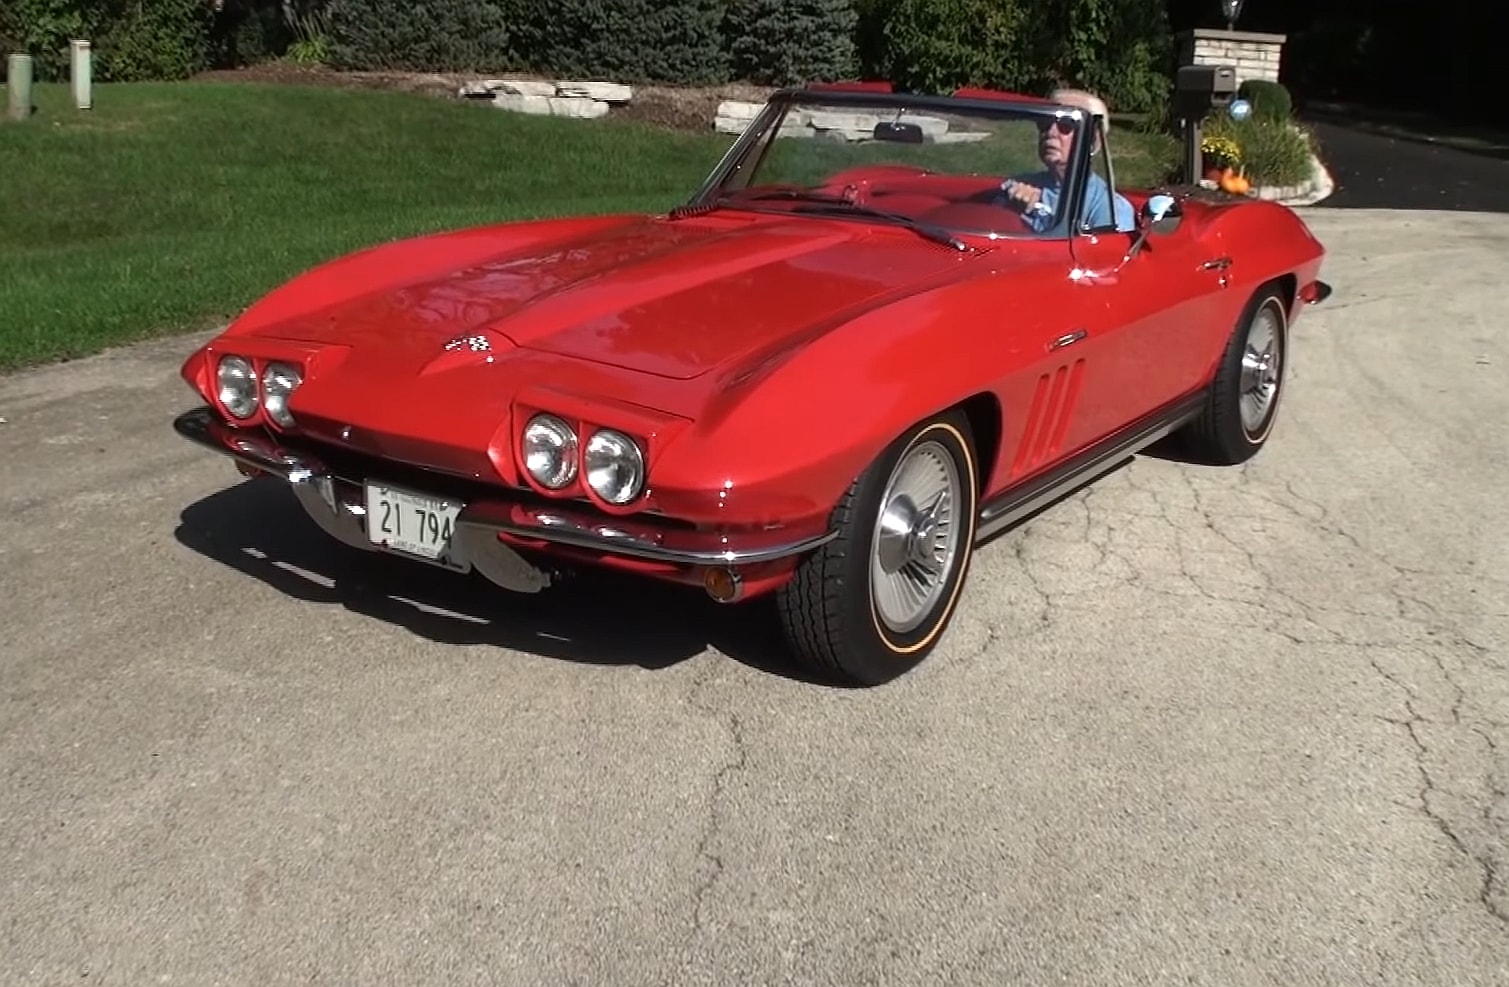 Stunning 1965 Chevrolet Corvette Fuelie Is What All Barn Finds Hope To Become - autoevolution